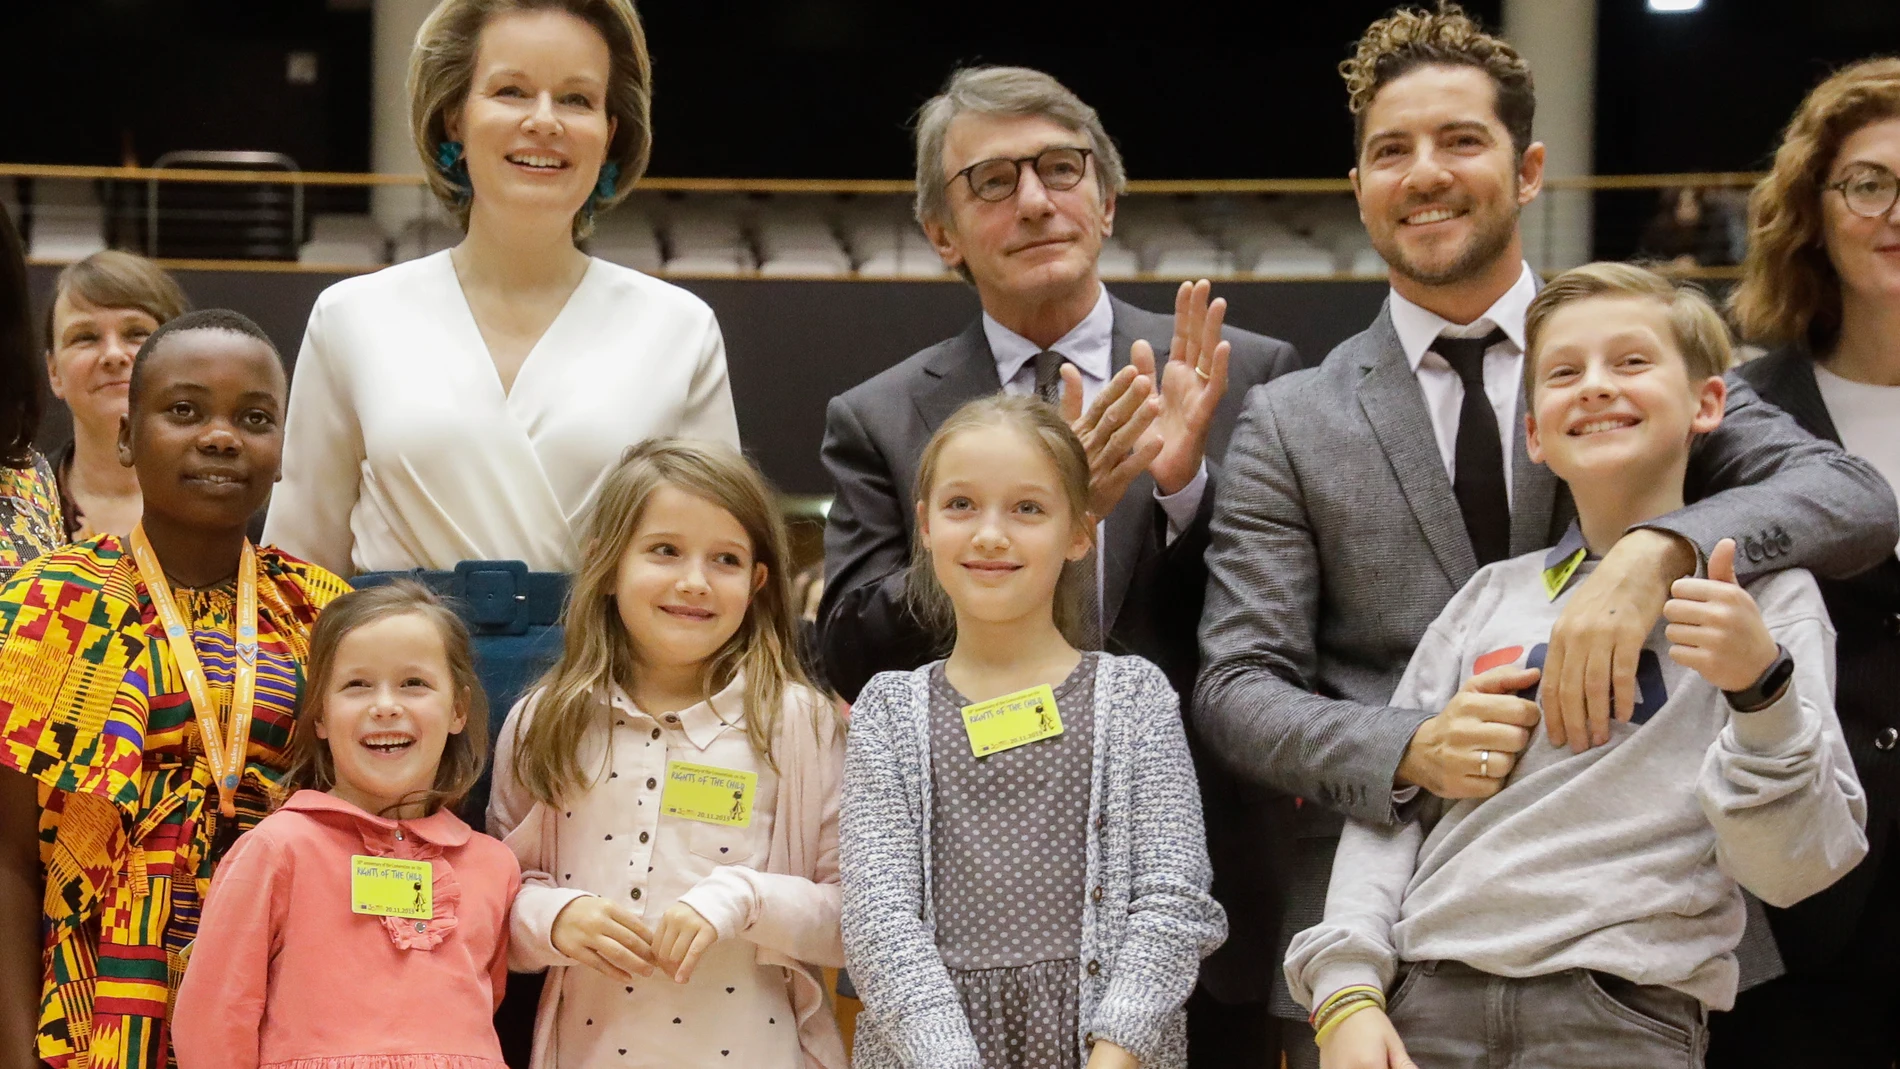 20 November 2019, Belgium, Brussel: Queen Mathilde of Belgium, European Parliament President David Maria Sassoli and Spanish singer David Bisbal, goodwill Ambassador of the UNICEF pictured pose for a picture with participant children during the 30th Anniversary of the UN Convention on the Rights of the Child conference. Photo: Thierry Roge/BELGA/dpa20/11/2019 ONLY FOR USE IN SPAIN